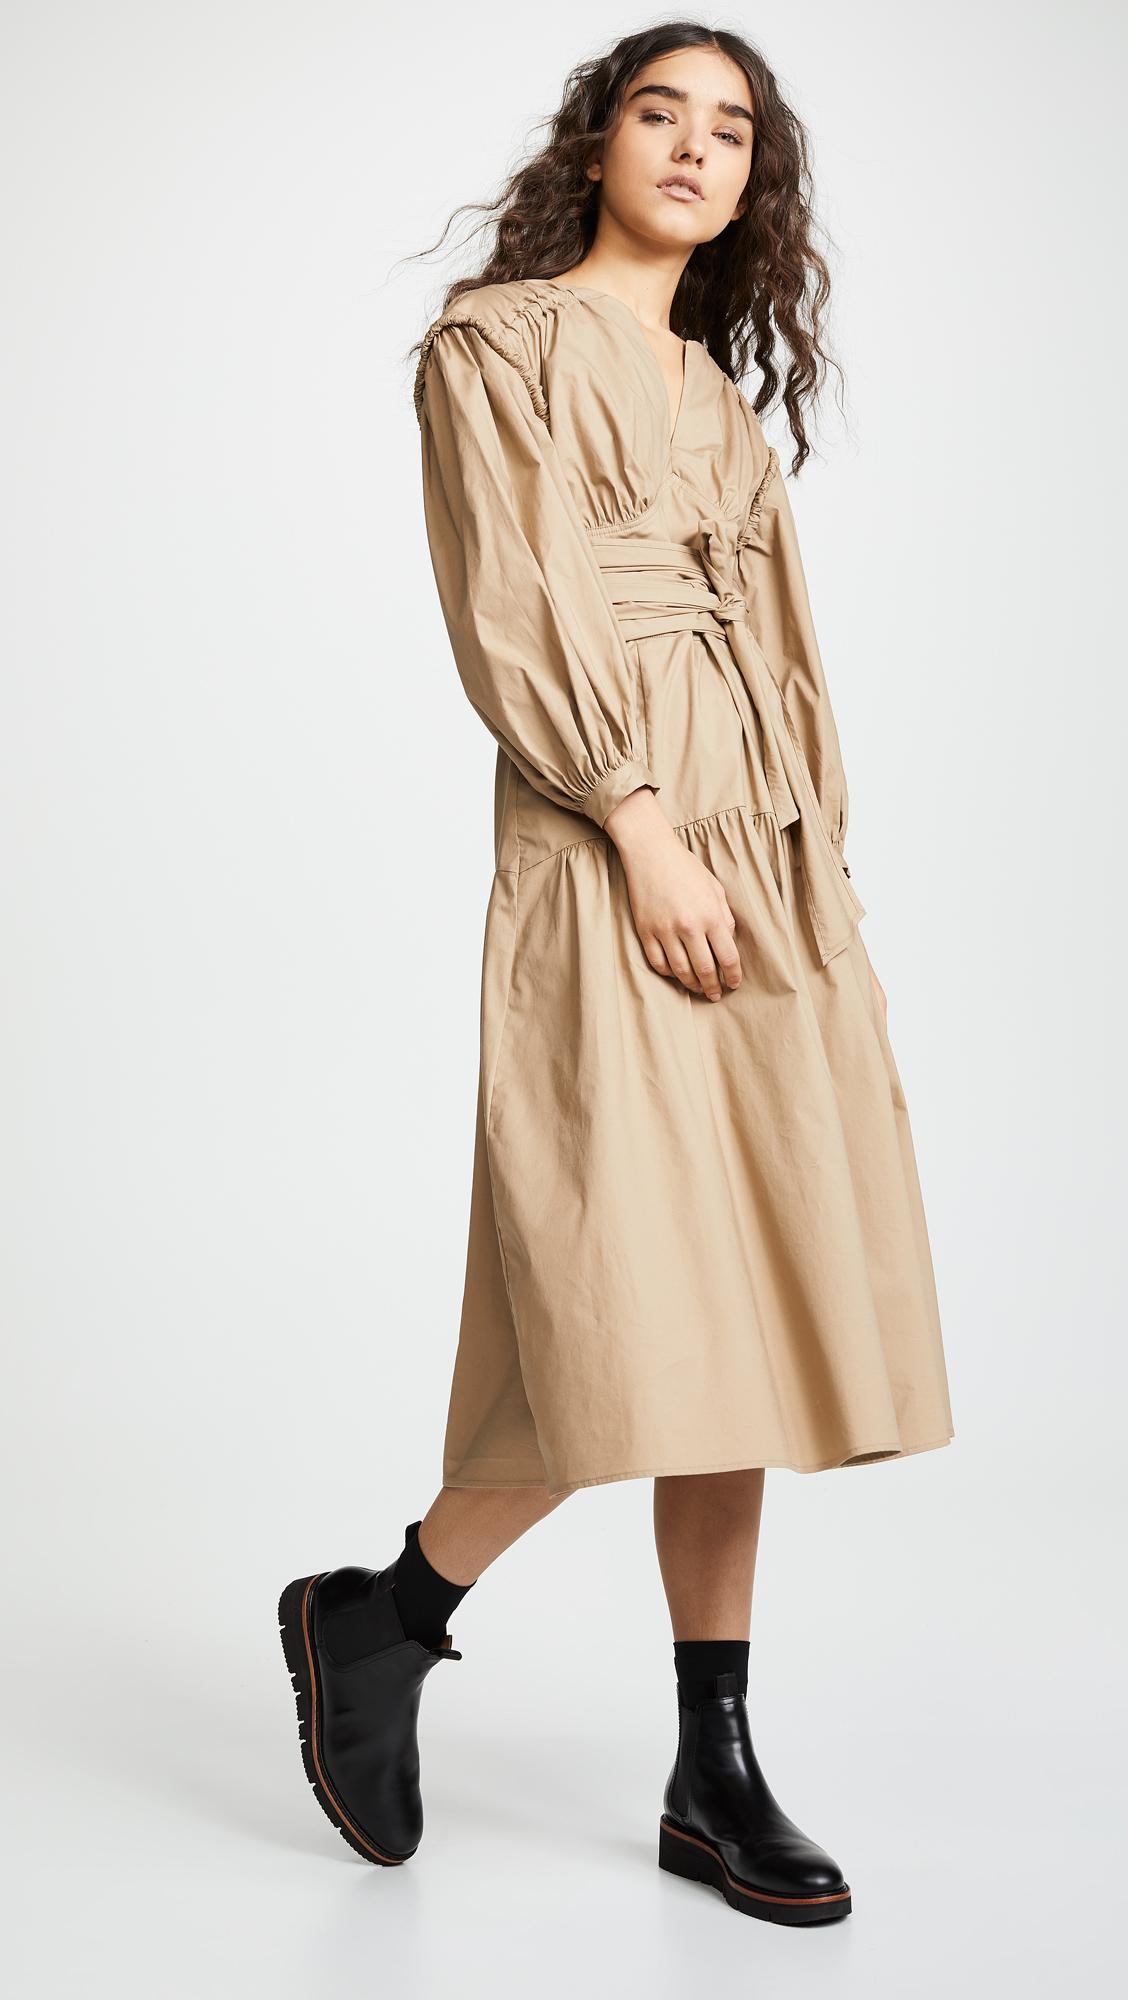 Sea Cotton Cruise Classic Relaxed Dress in Sand (Natural) - Lyst